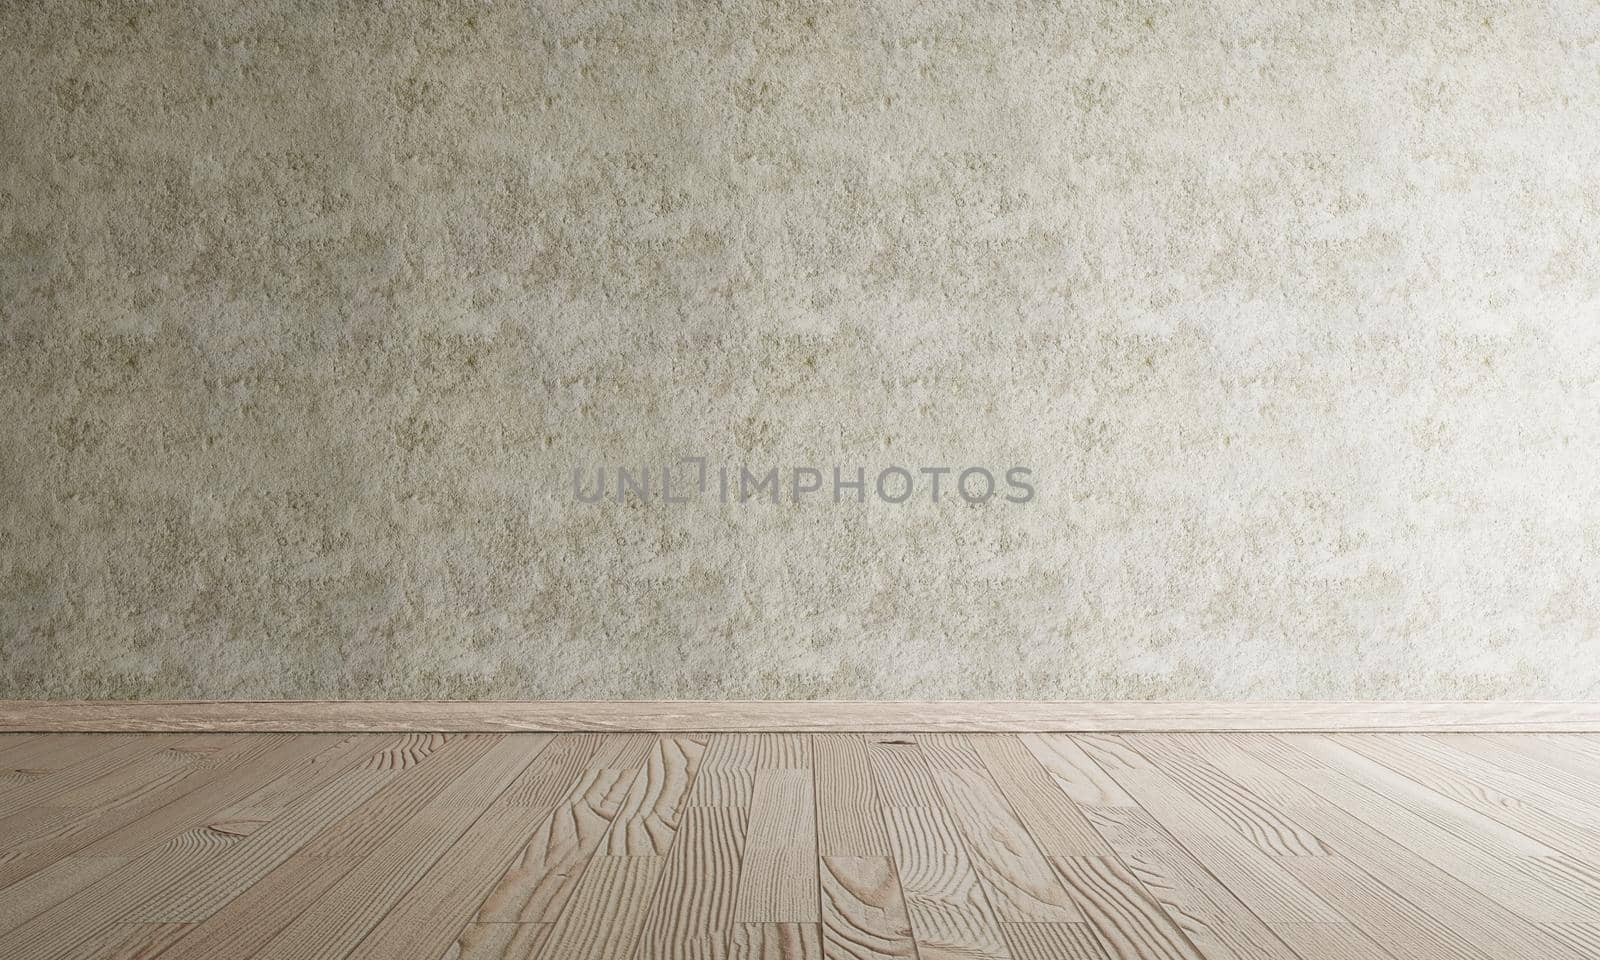 Empty room with wooden floor and raw concrete wall in dark tone vintage style background. Interior architecture and construction material wallpaper concept. 3D illustration rendering